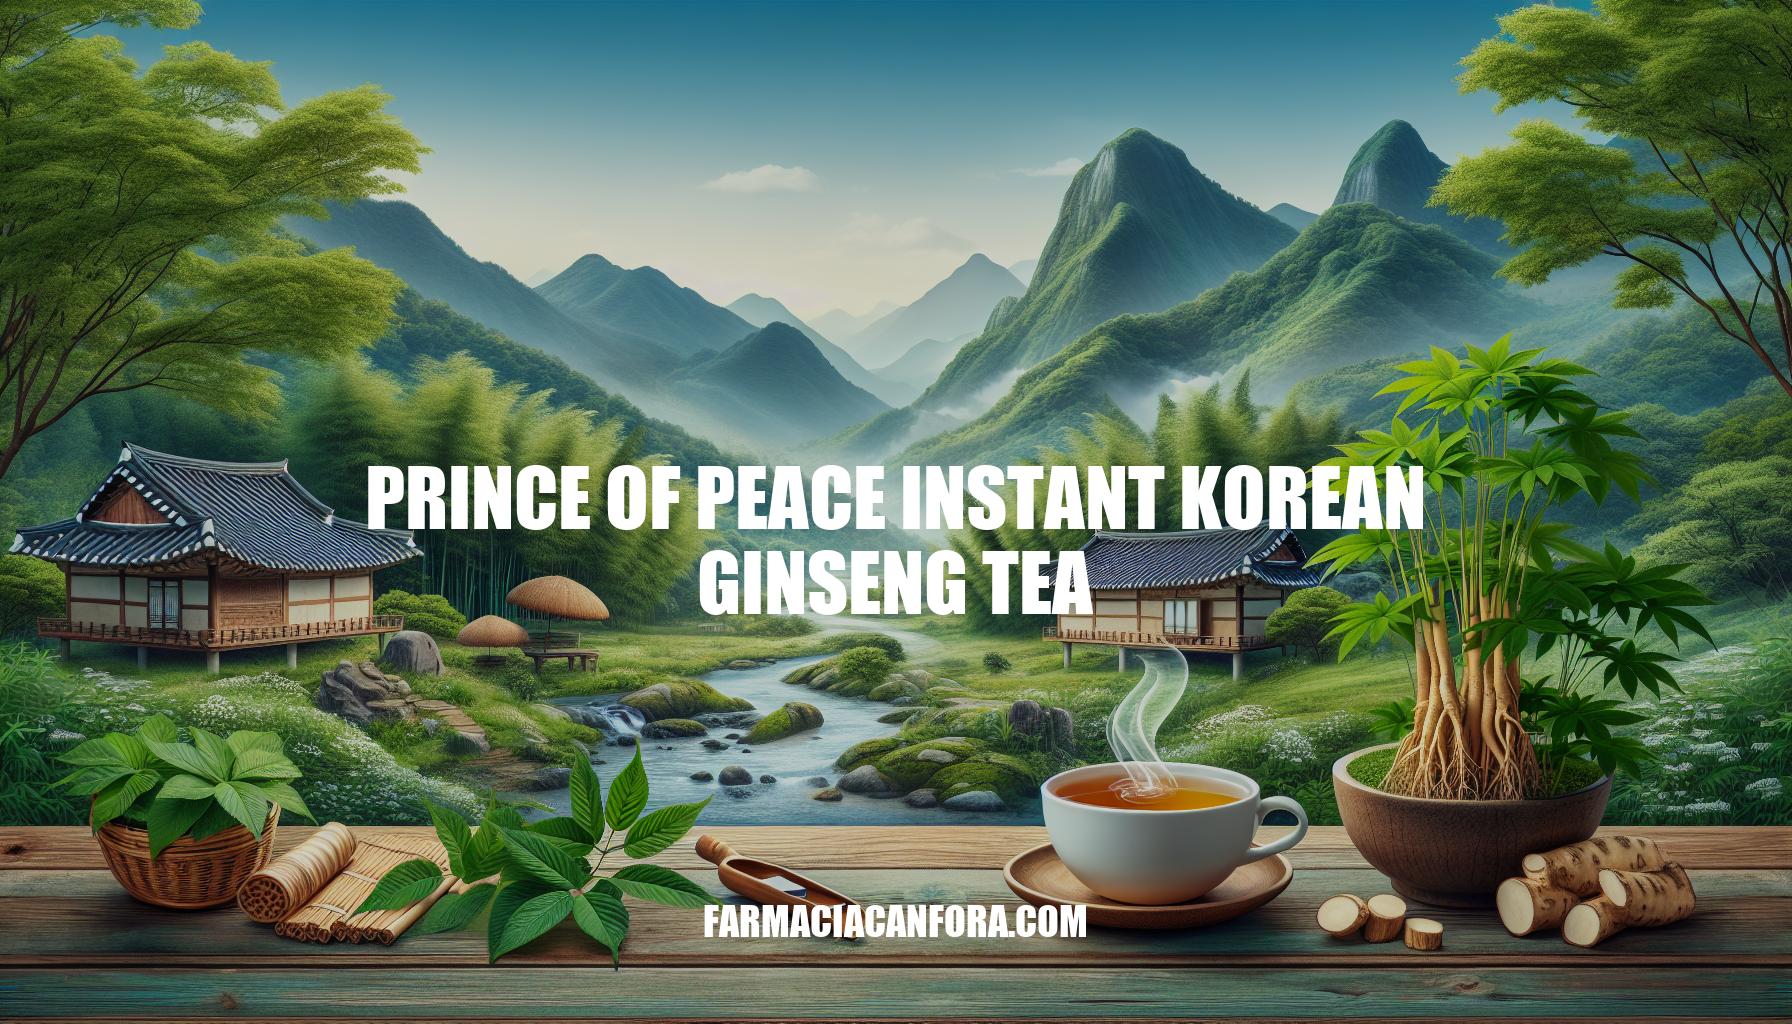 Prince of Peace Instant Korean Ginseng Tea: Benefits and Usage